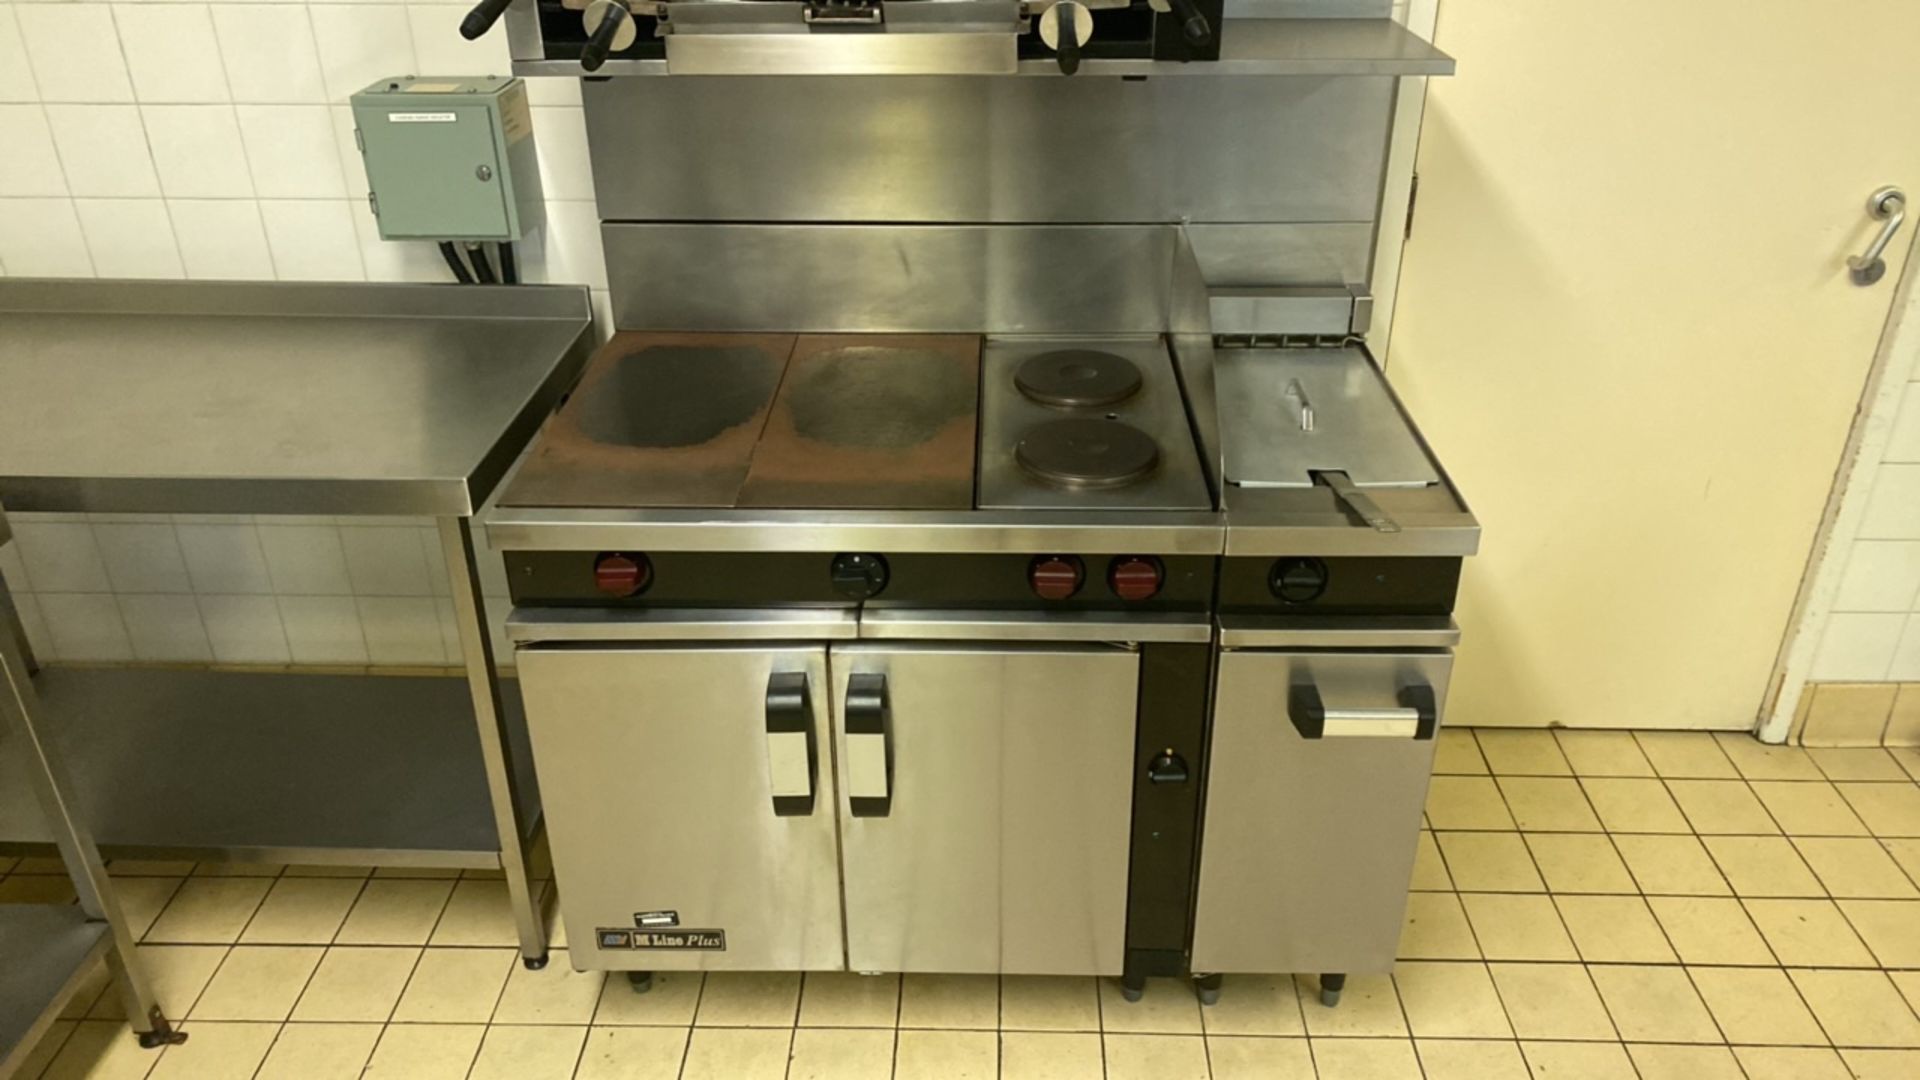 Morewood M Line Plus Solid Top Oven with Fryer - Image 2 of 7